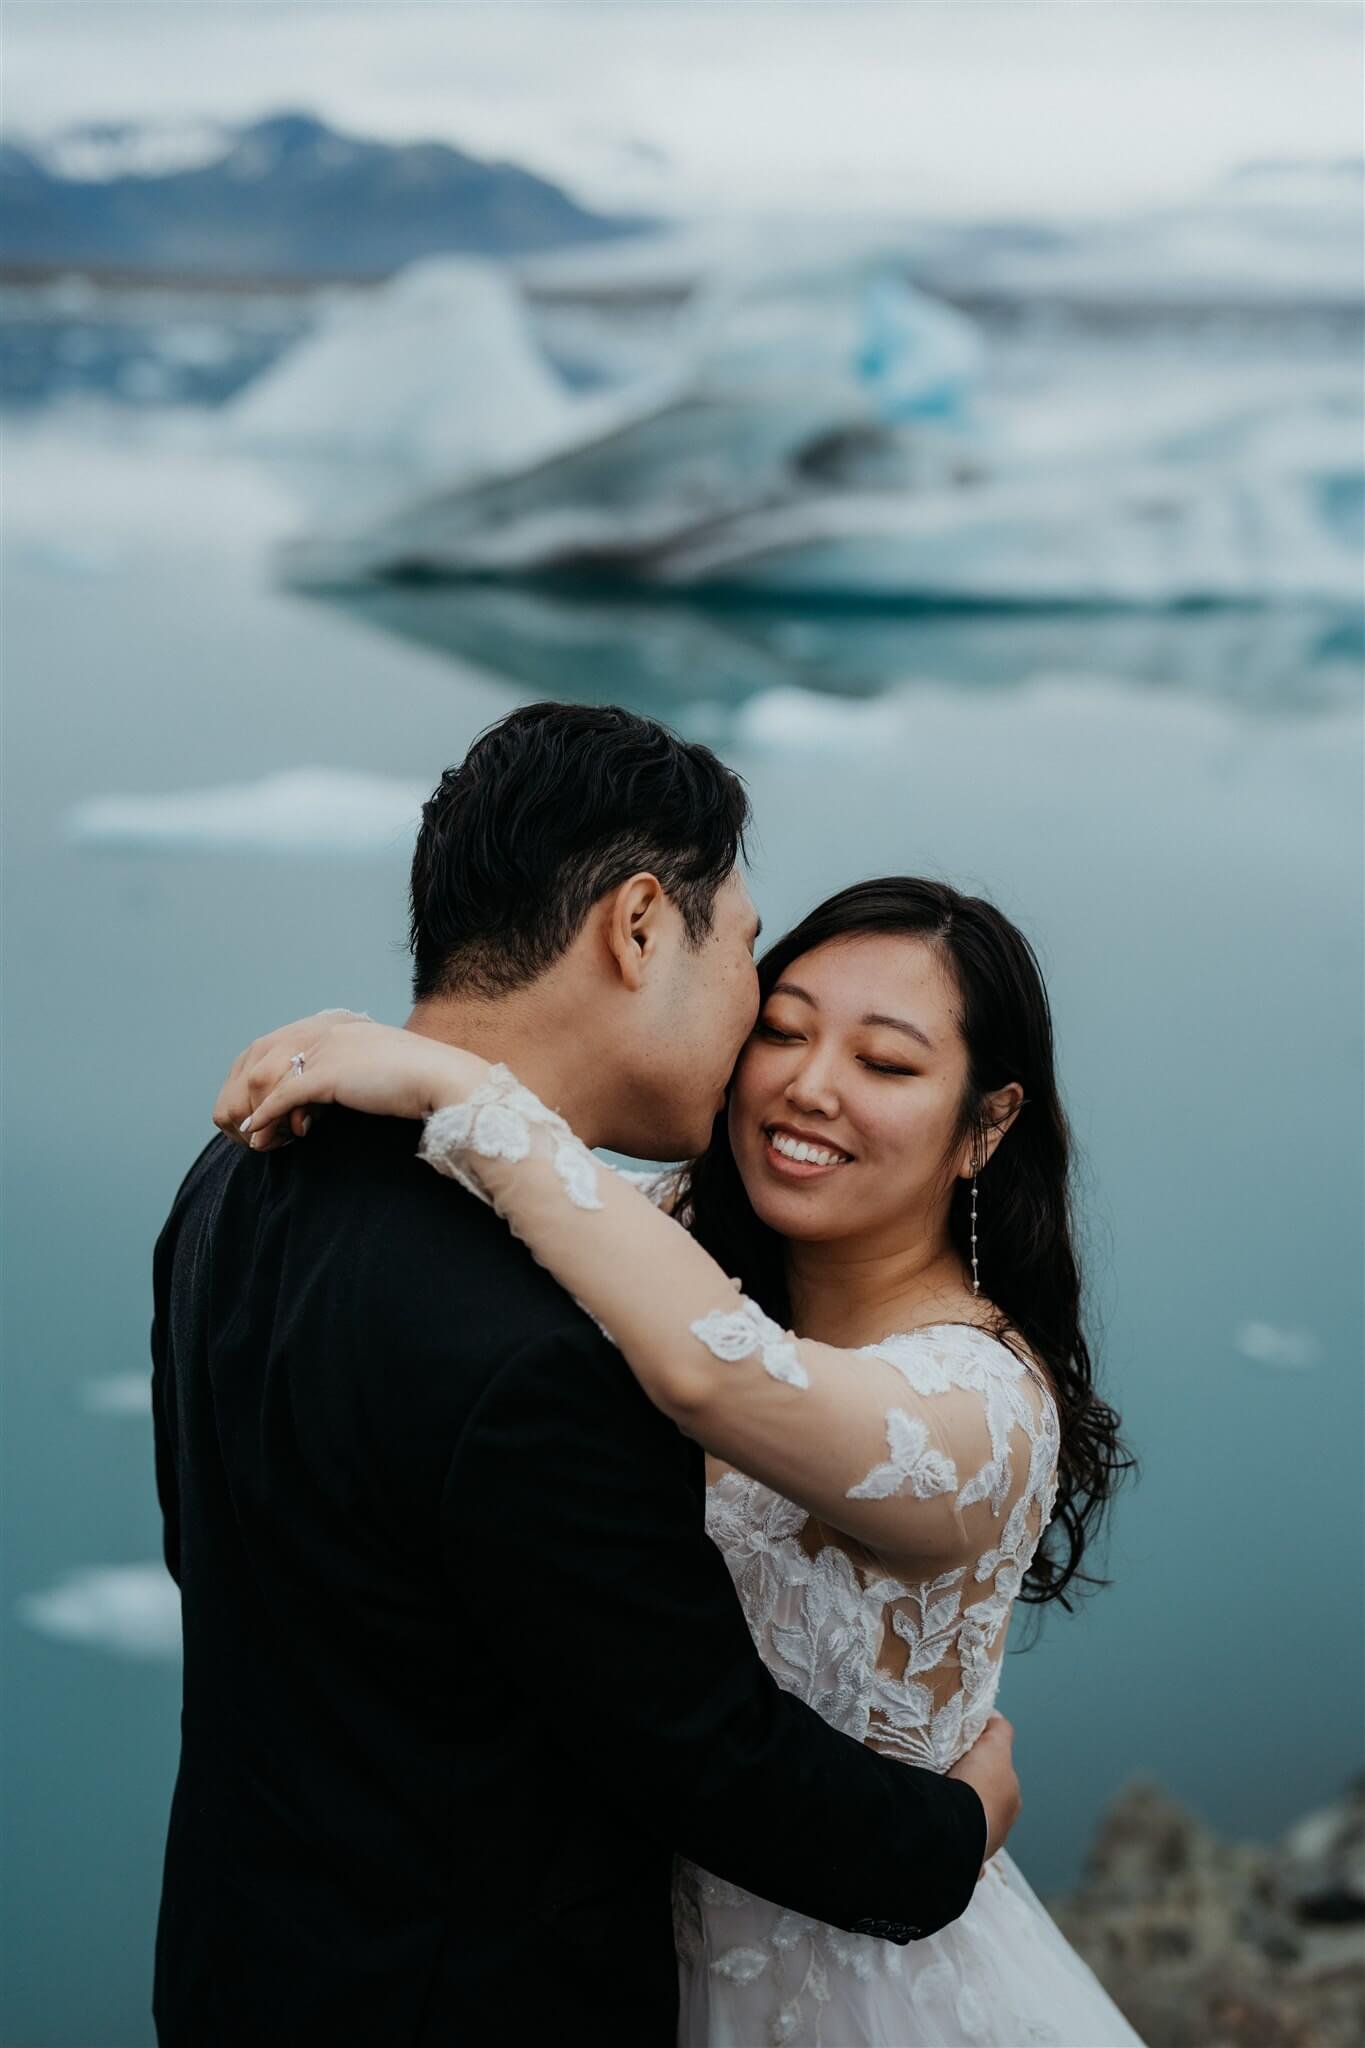 Bride and groom hug beside an icy lagoon during their elopement in Iceland